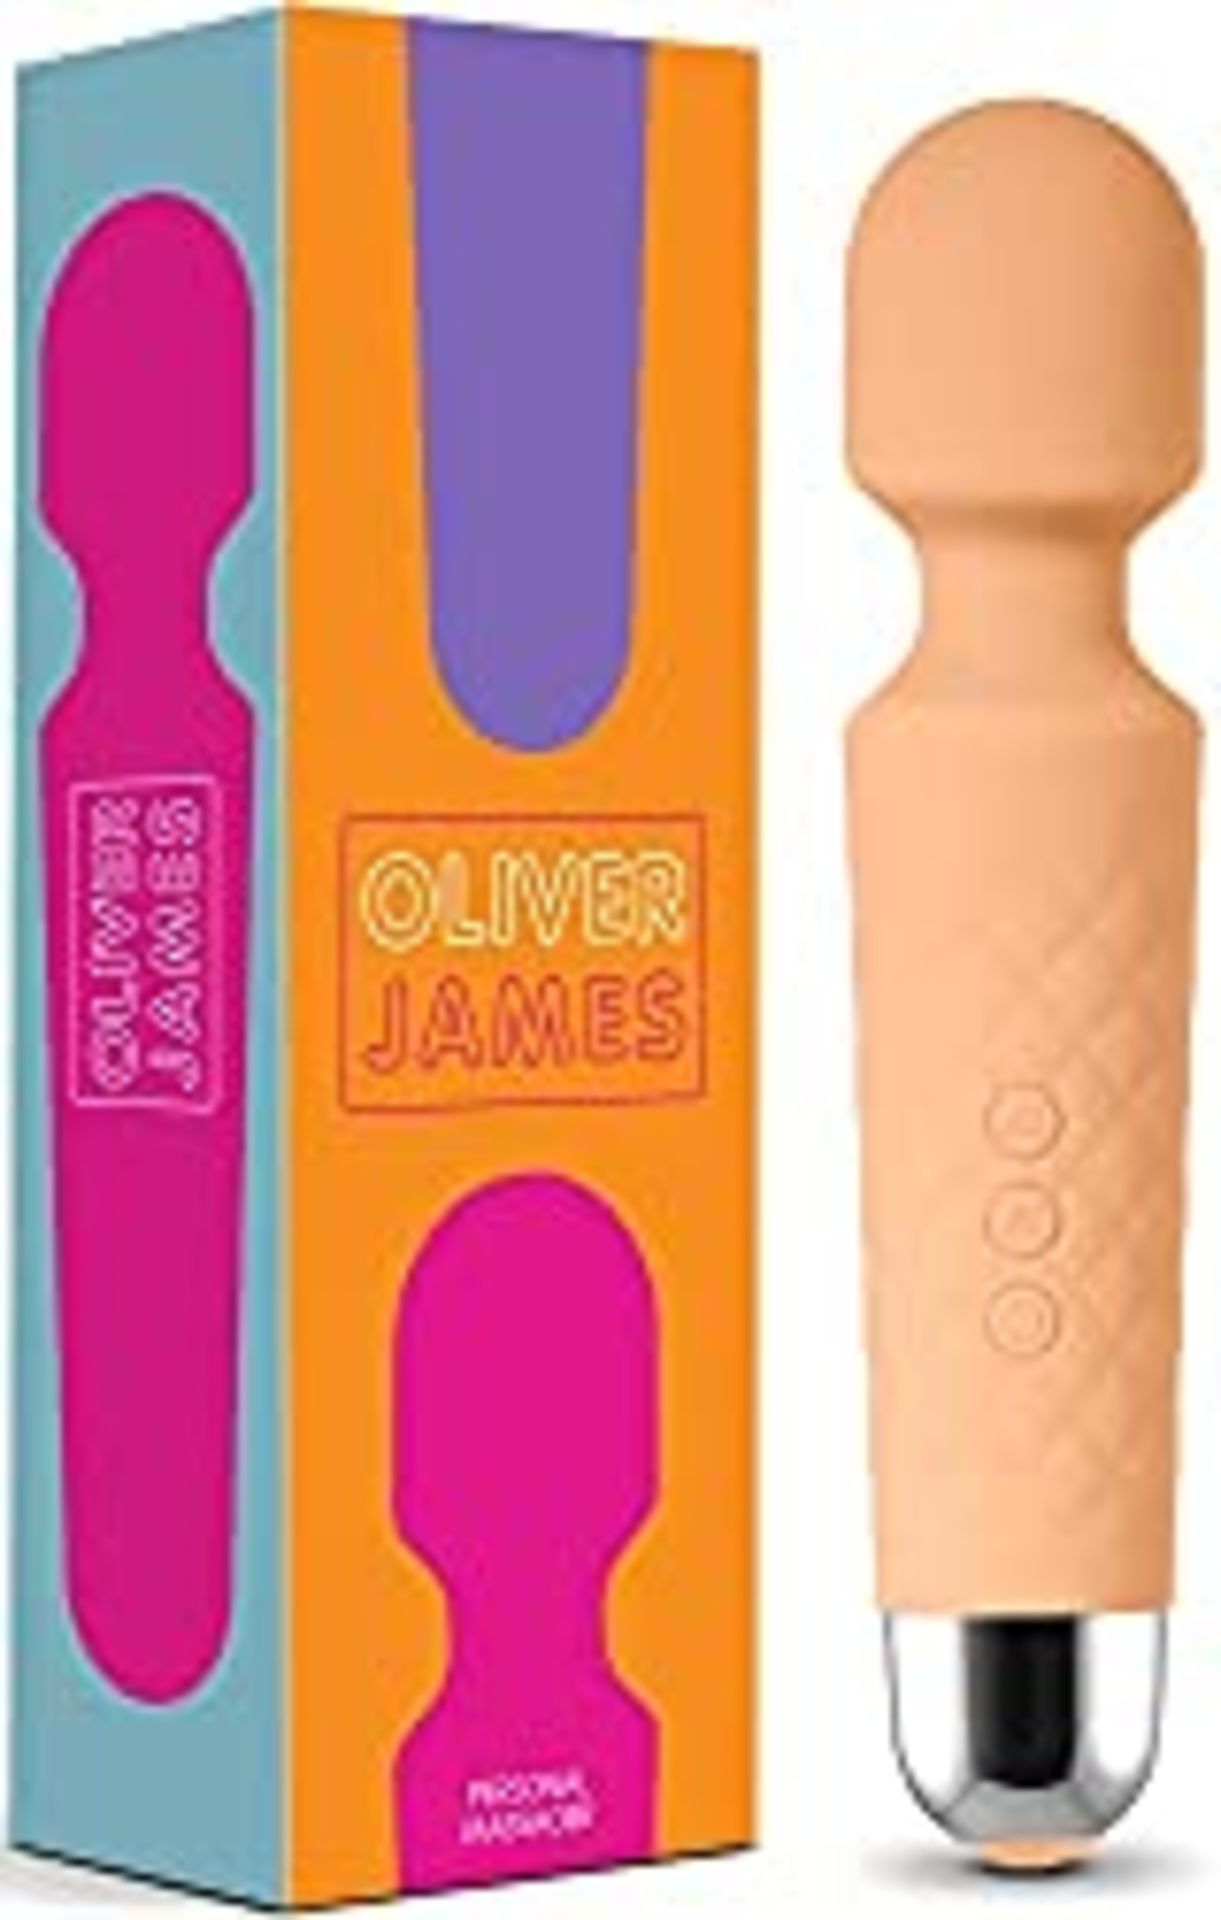 RRP £25.94 Oliver James Vibrator - Powerful Person